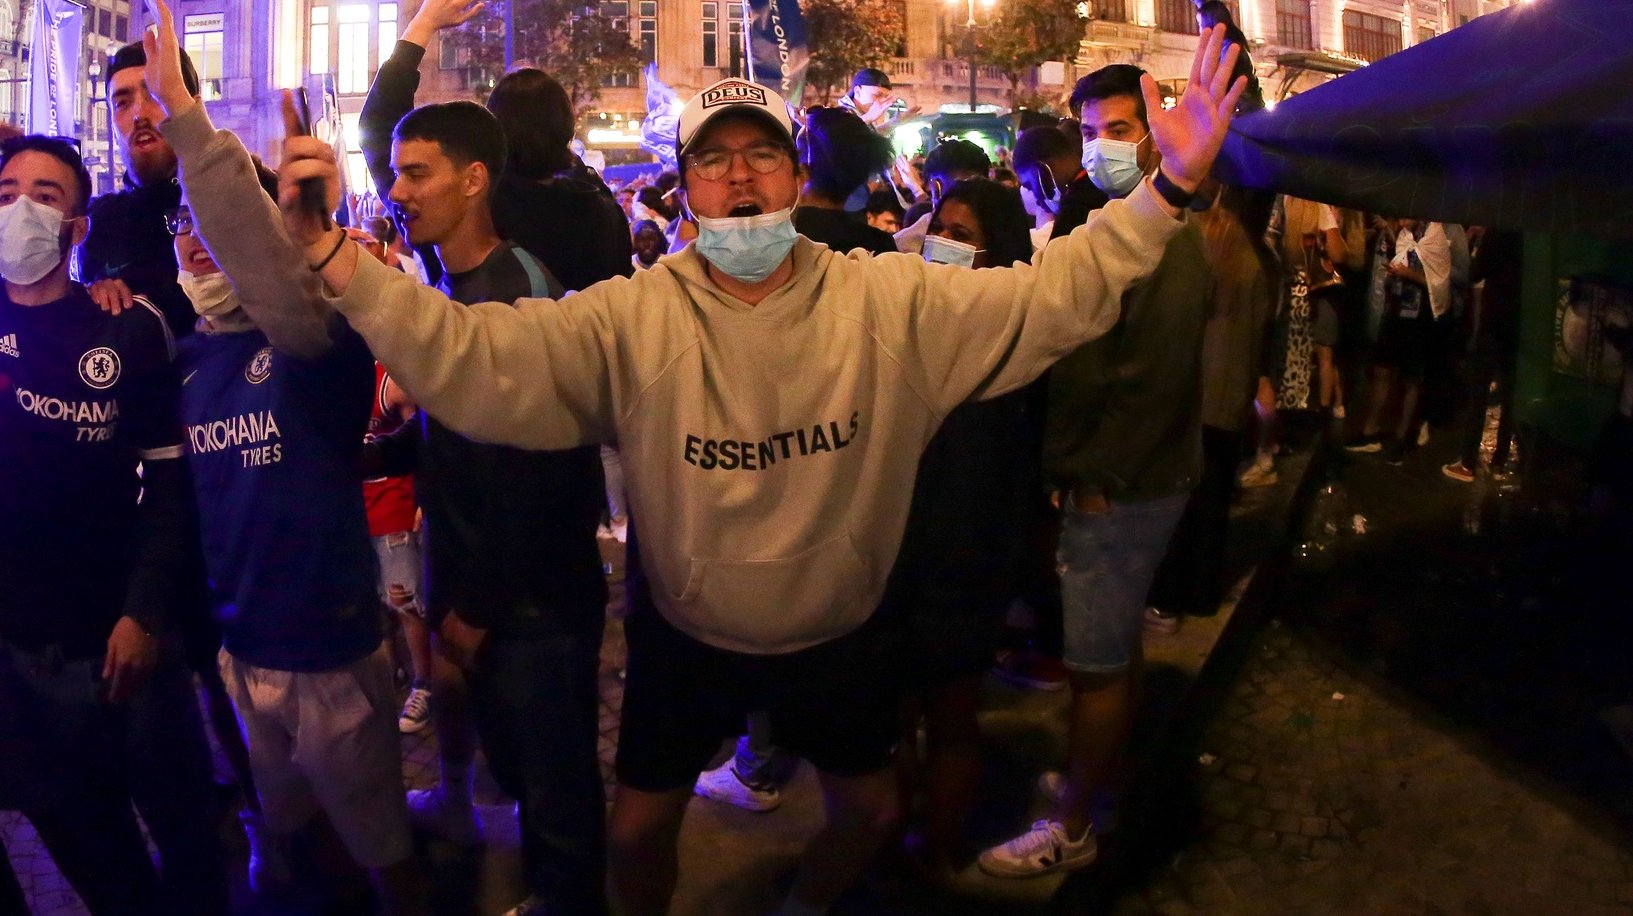 Chelsea supporters celebrate in Avenida dos Aliados after their team defeated Manchester City in the final of UEFA Champions League soccer match held in Porto, Portugal, 29th May 2021.  MANUEL FERNANDO ARAUJO/LUSA